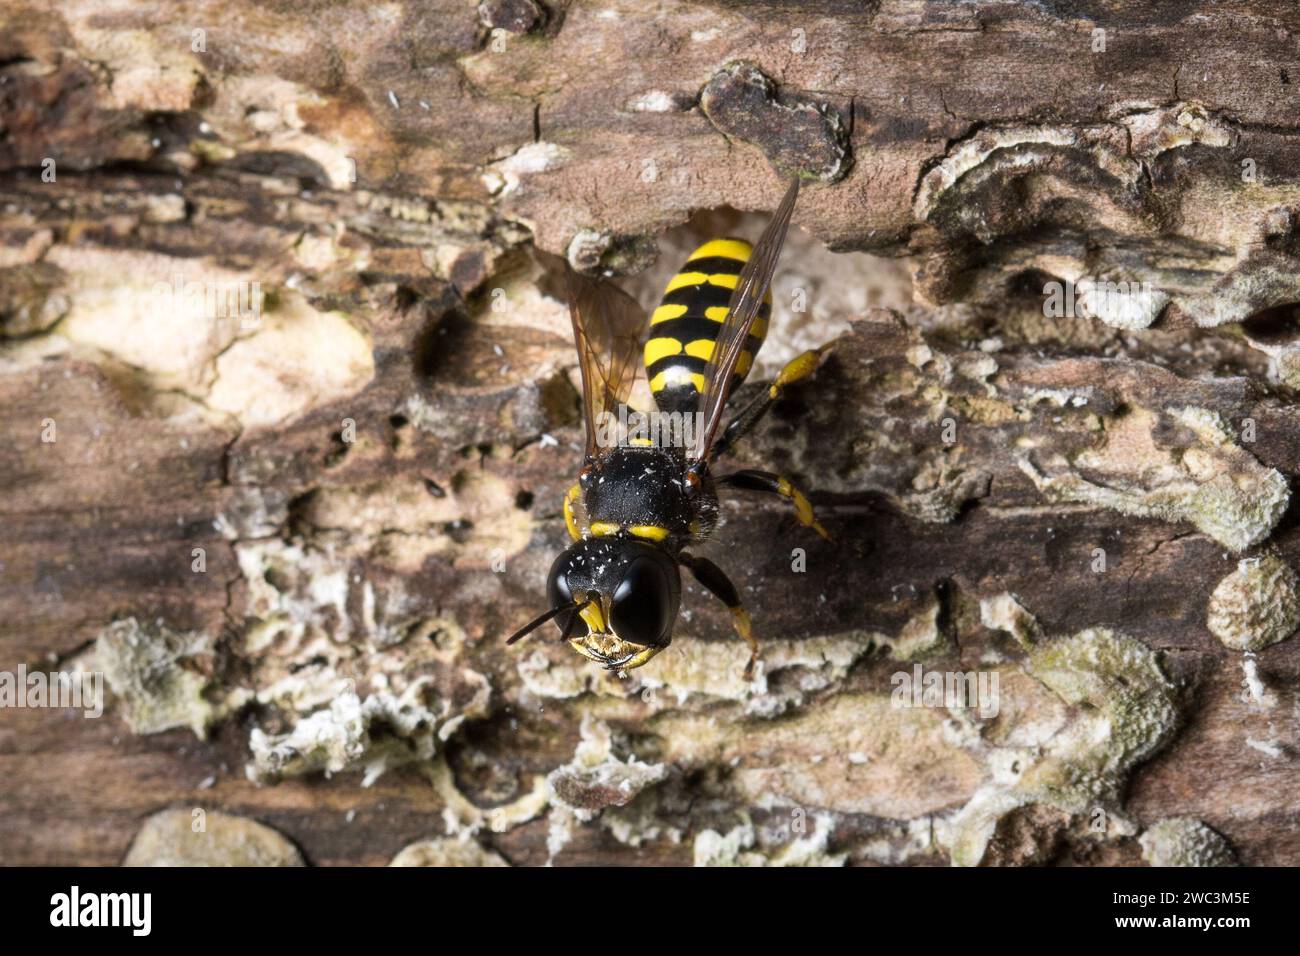 A female solitary wasp (Ectemnius sp) existing her nest in a rotting log. Photographed in Sunderland, North East England. Stock Photo